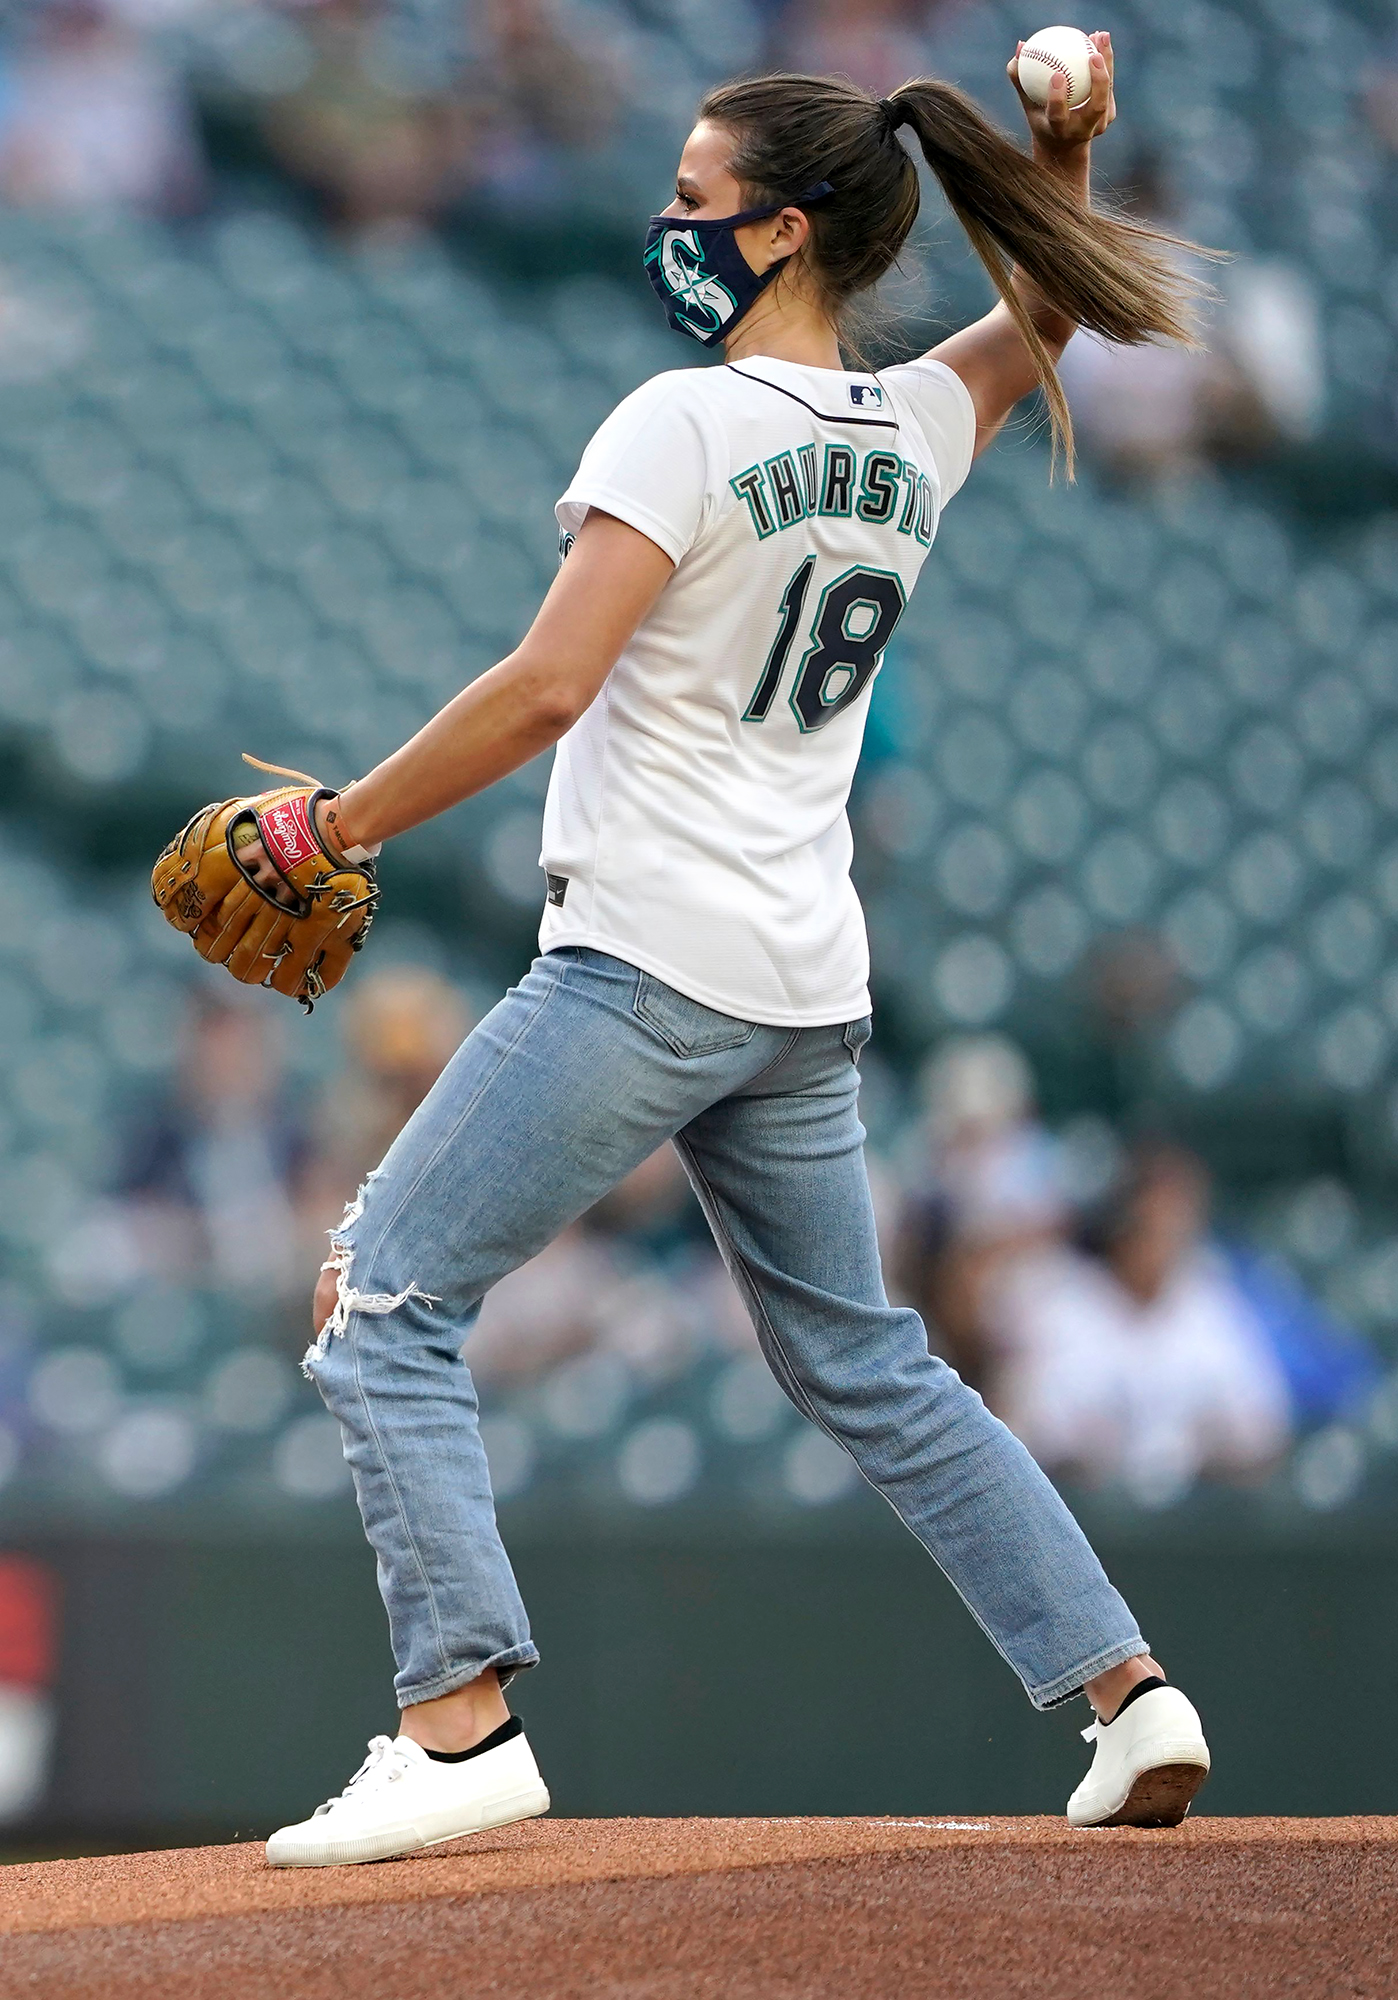 Bachelorette's Katie Thurston Throws Out First Pitch at Seattle Mariners Game